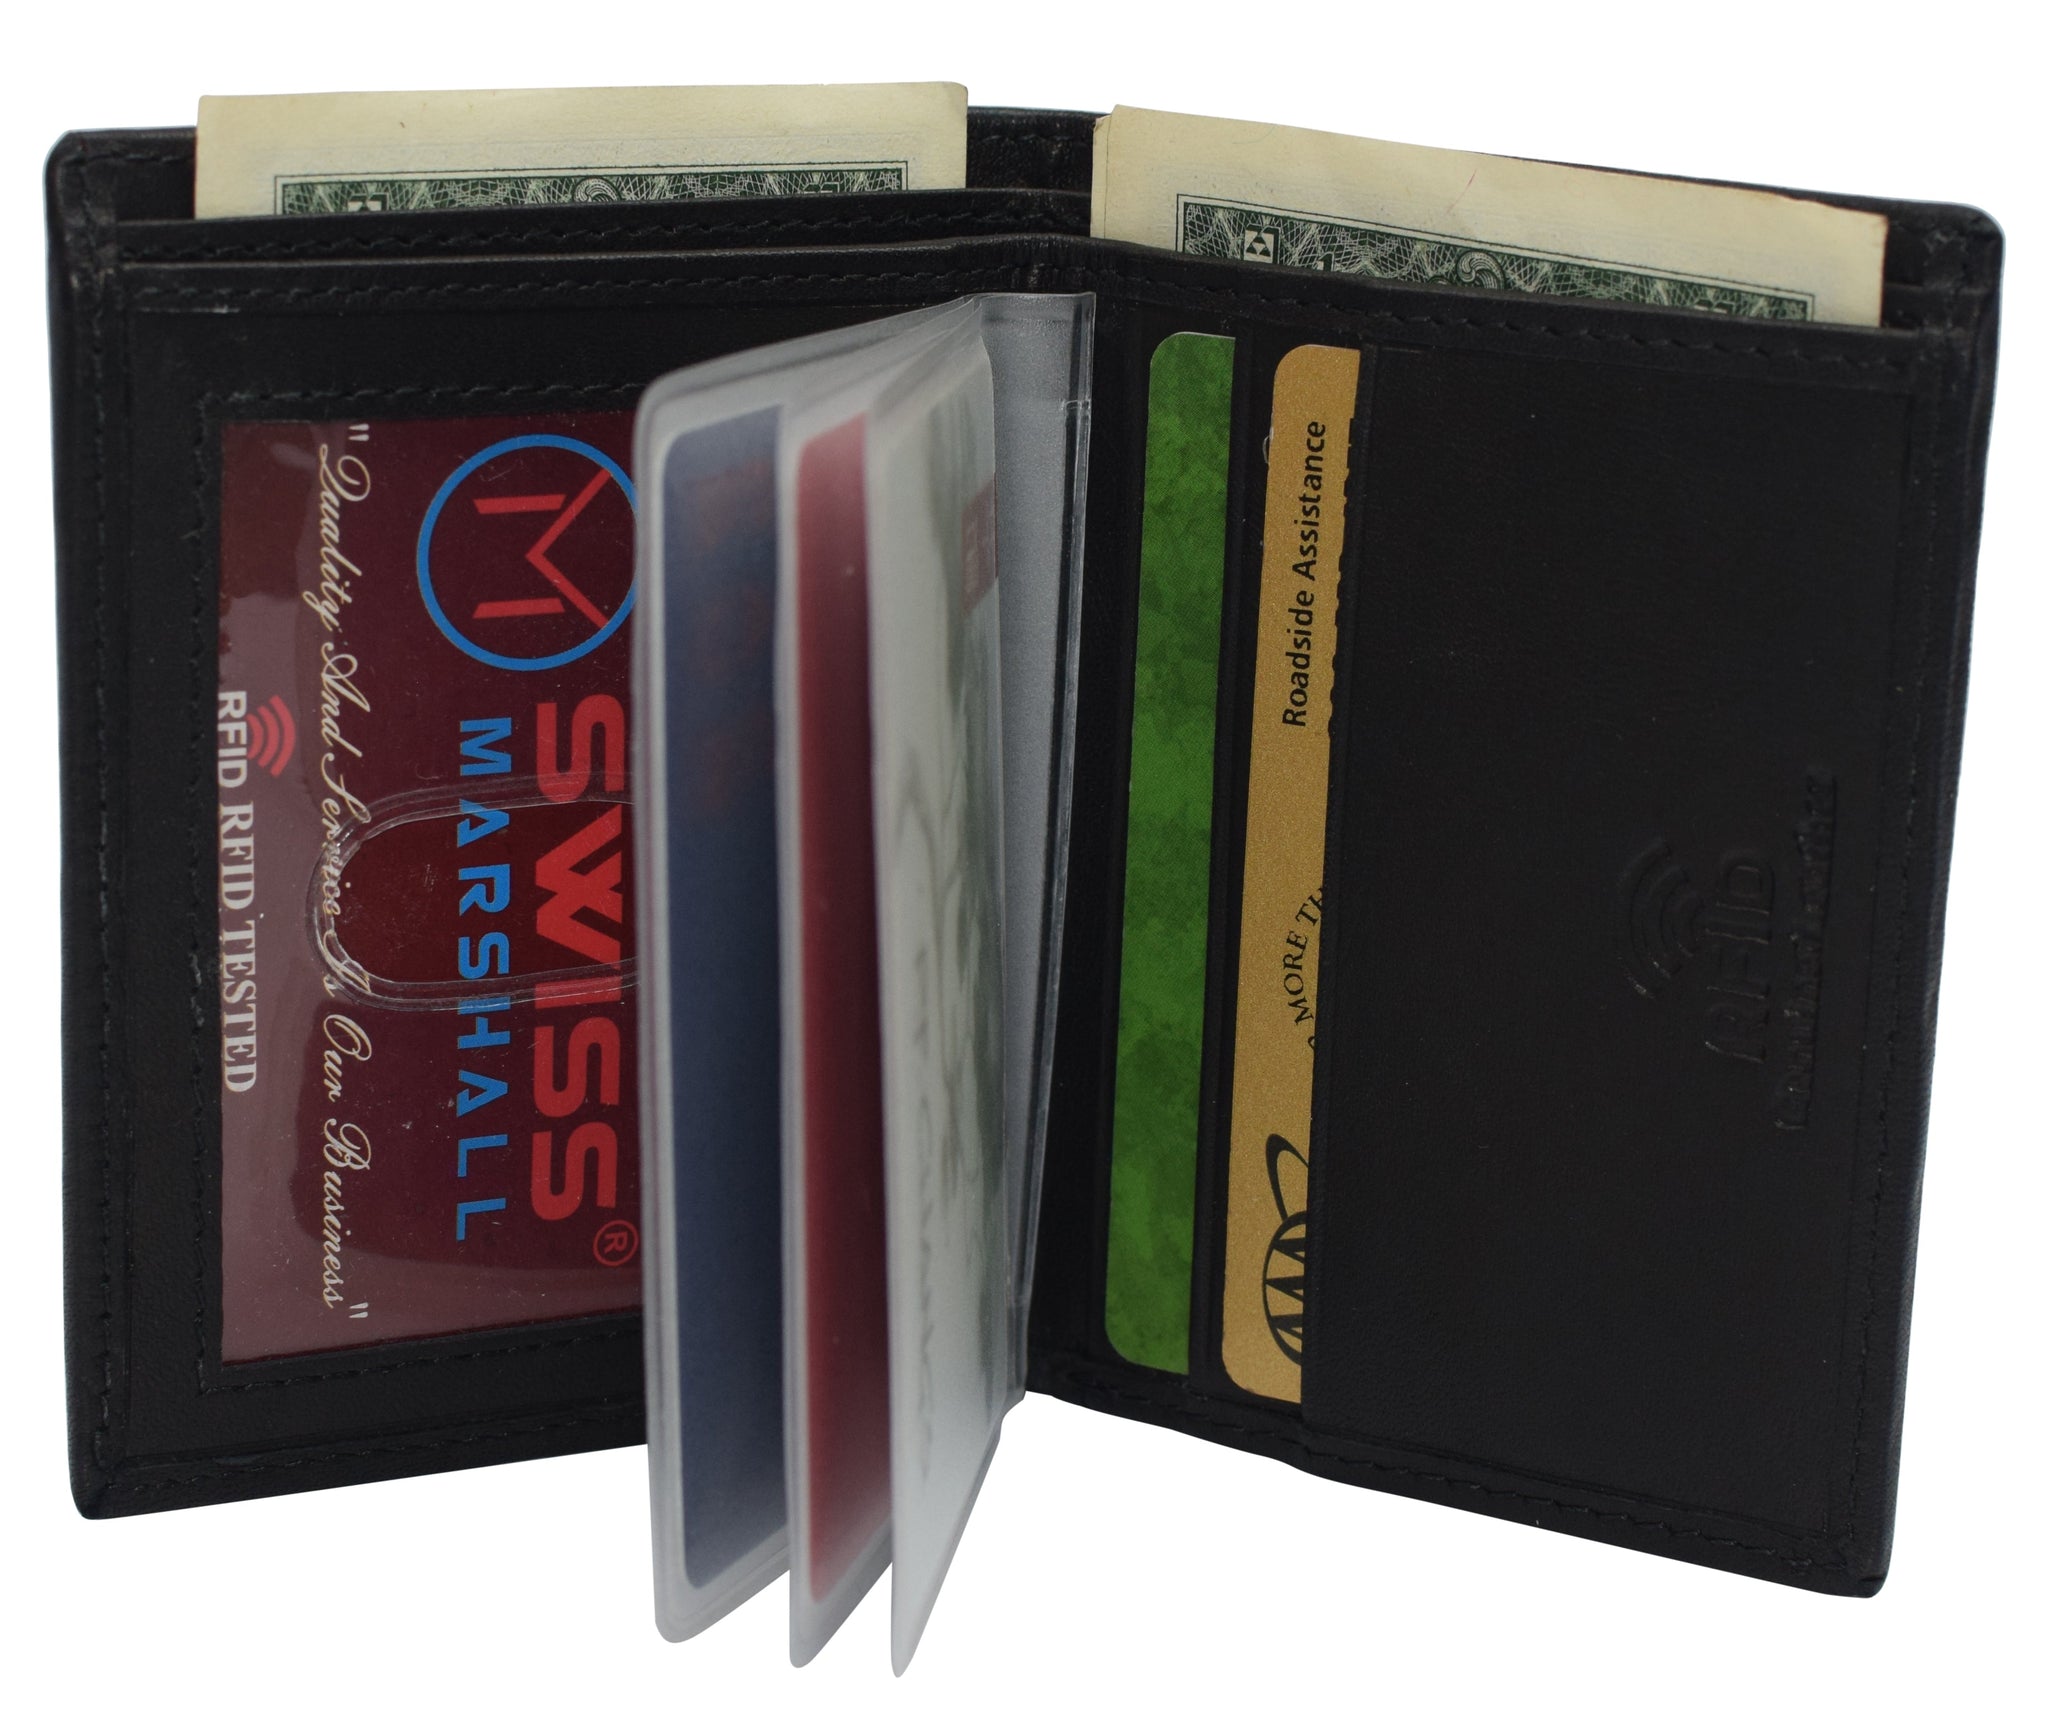 Men's Wallet Long Wallet High Quality Leather Thin Business